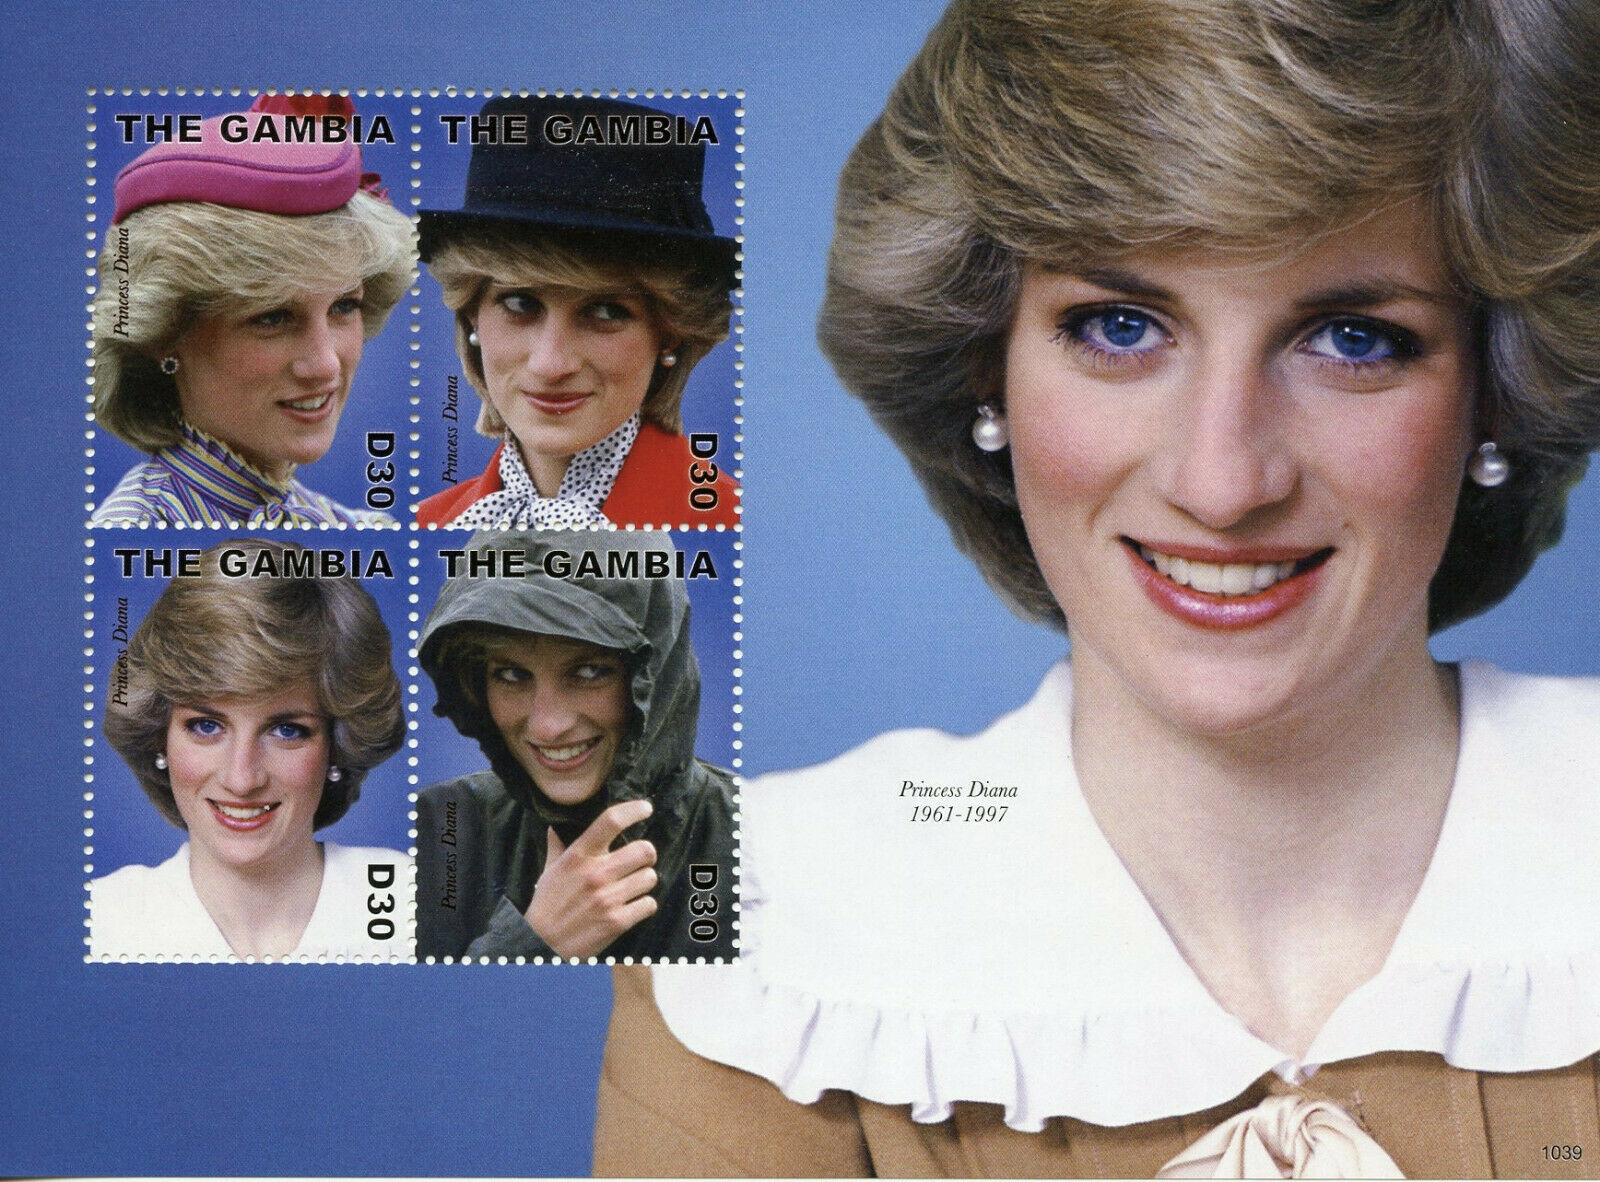 Gambia 2010 MNH Royalty Stamps Princess Diana 1961-1997 Famous People 4v M/S I